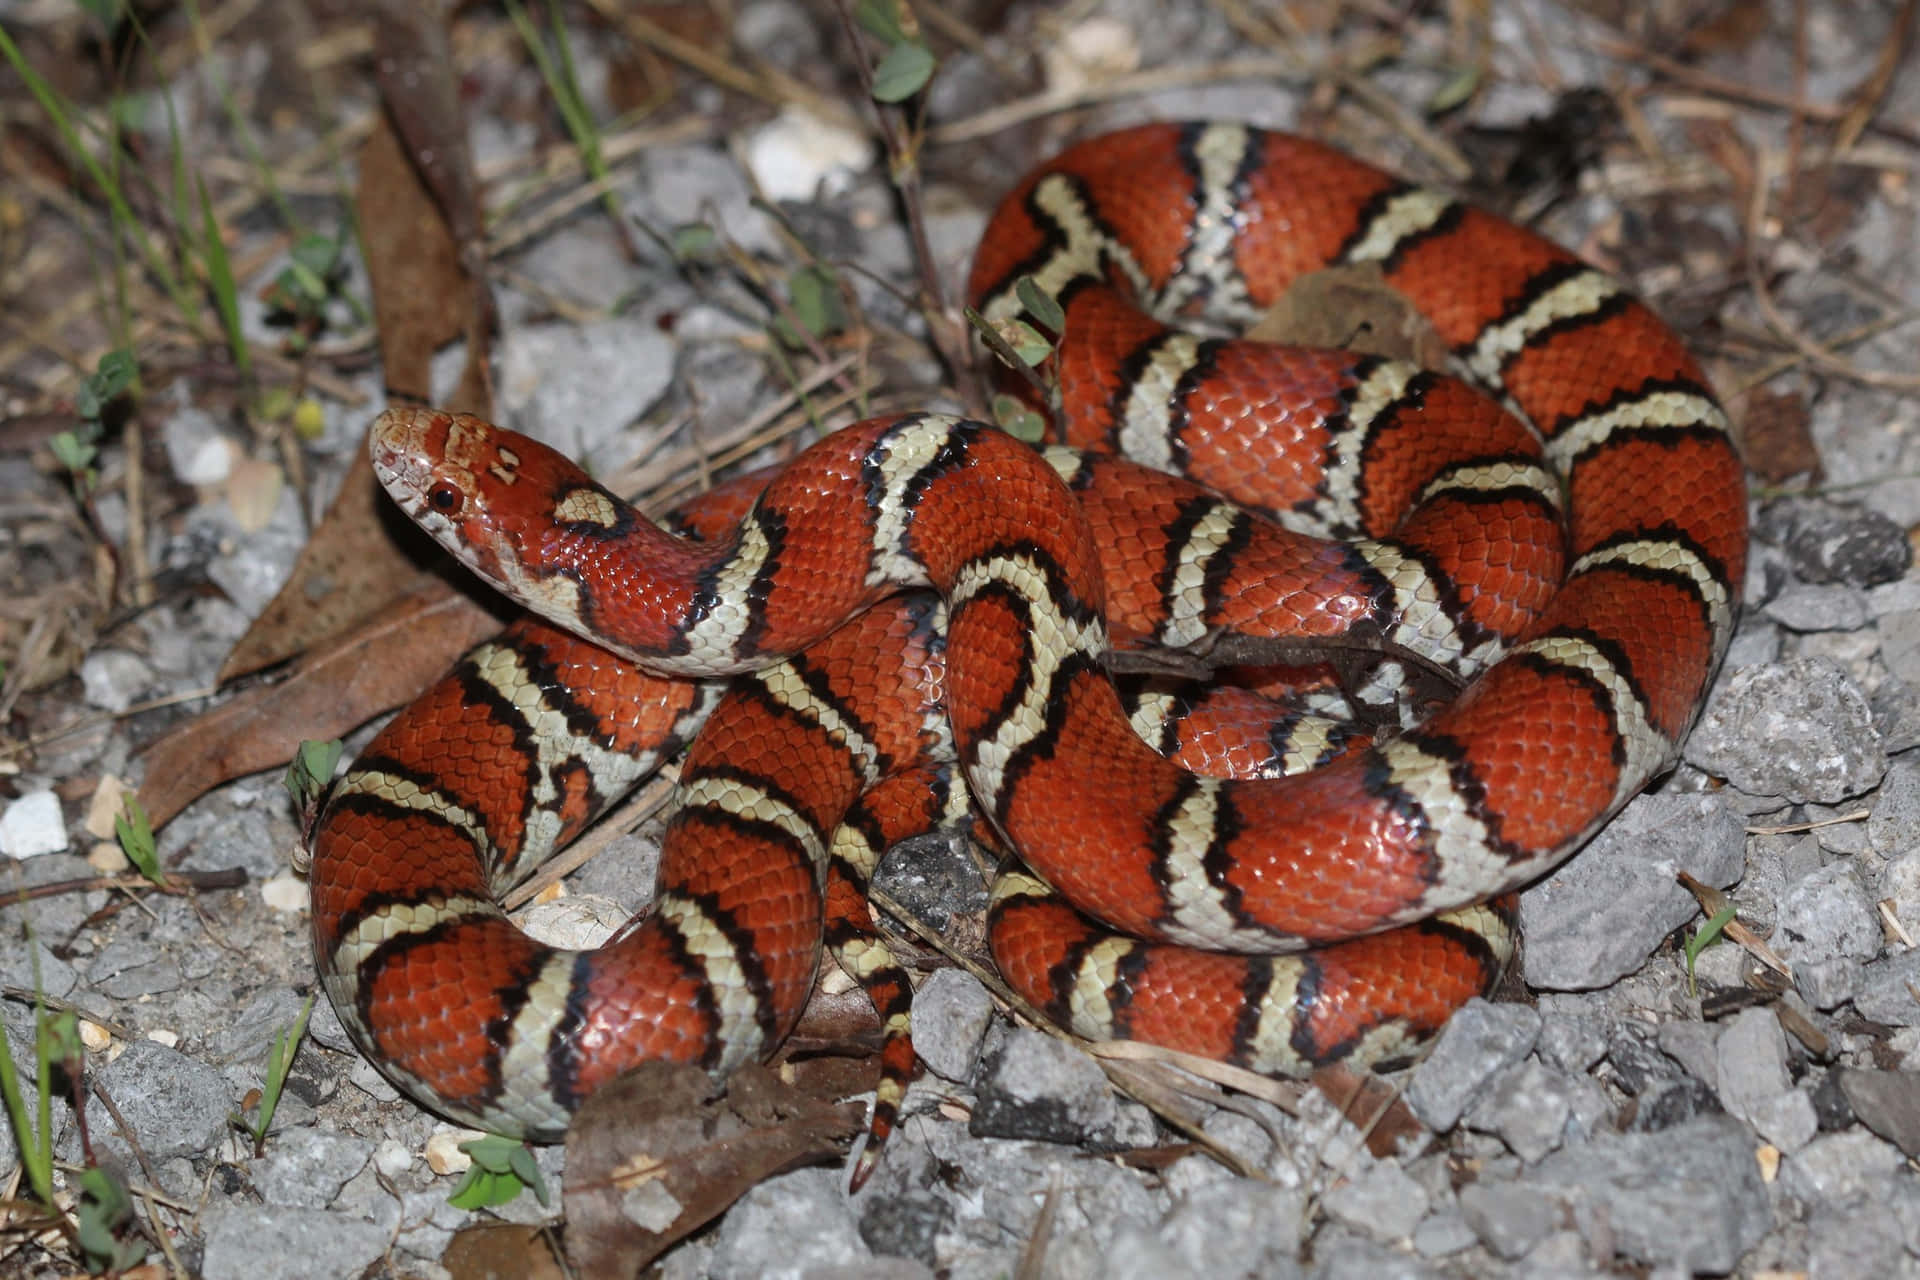 A Red And Black Snake Is Sitting On The Ground